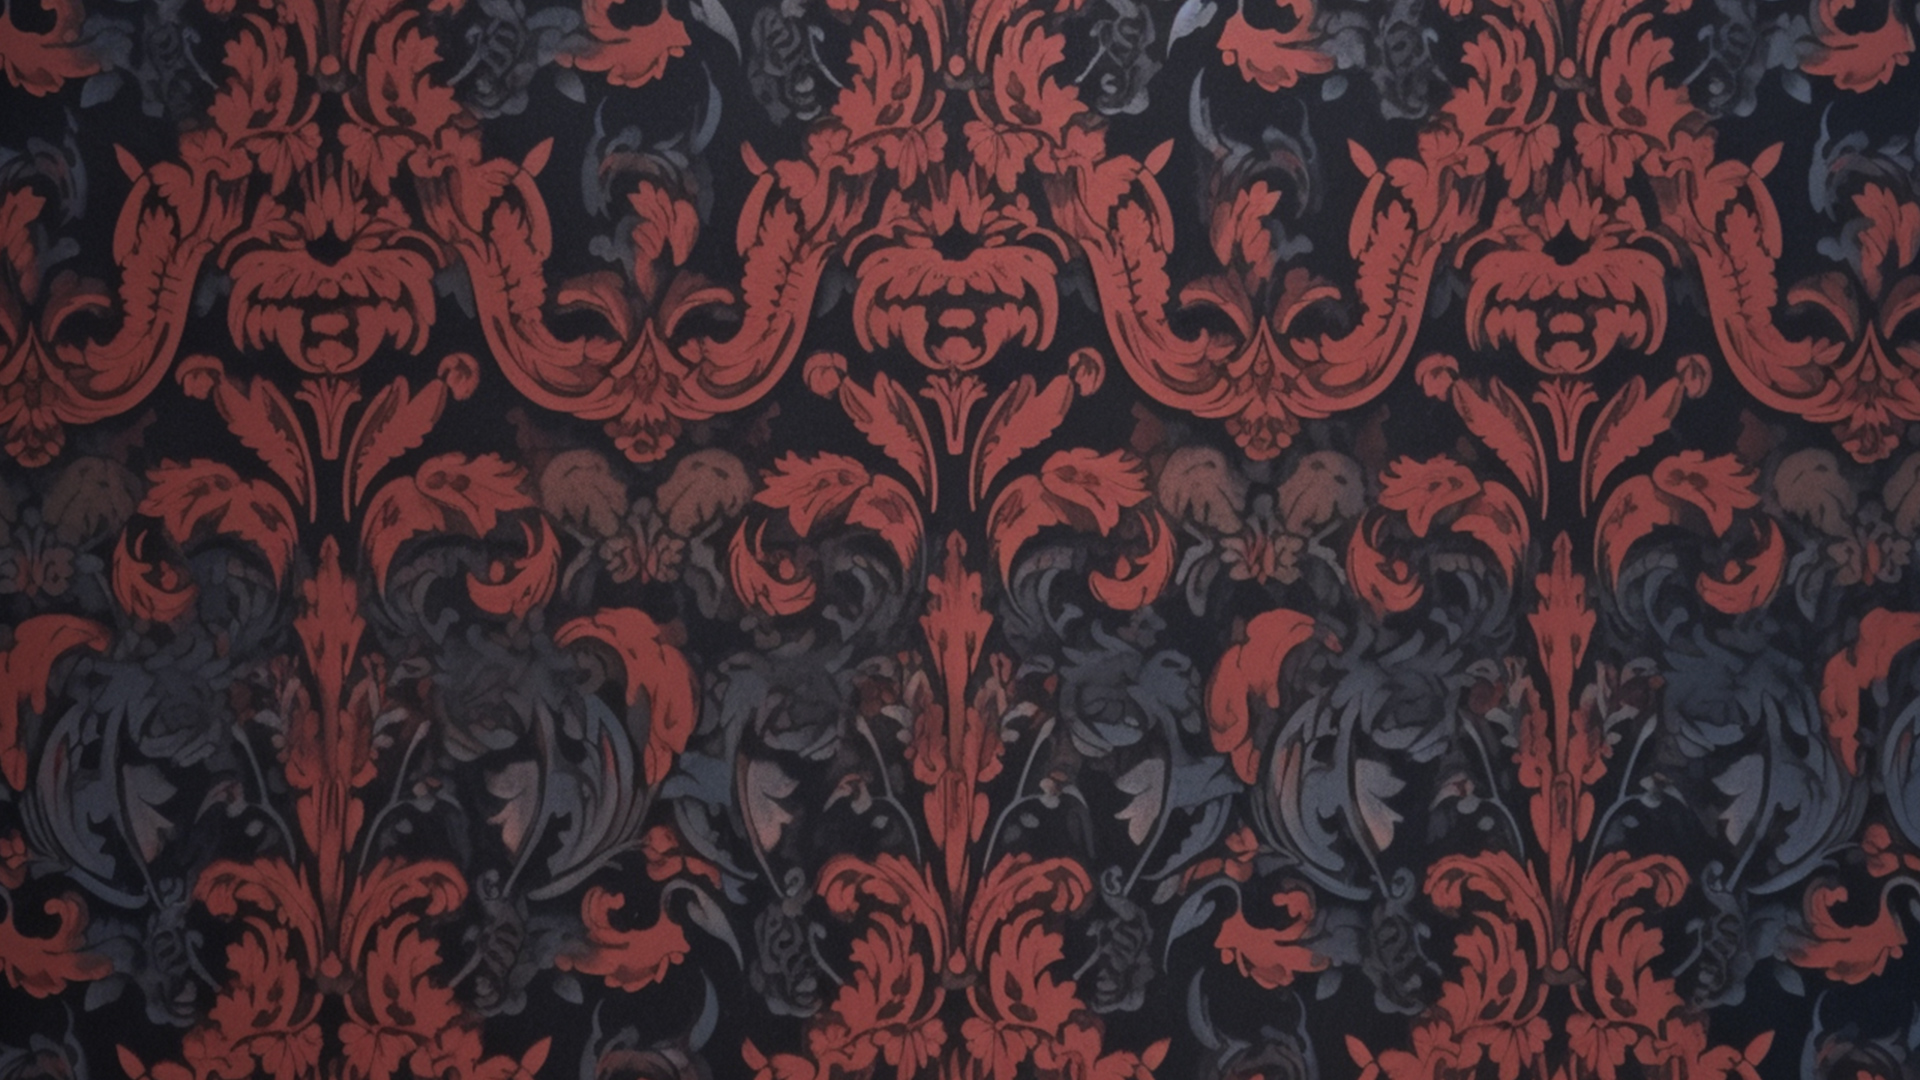 Wallpaper with red and black floral shapes